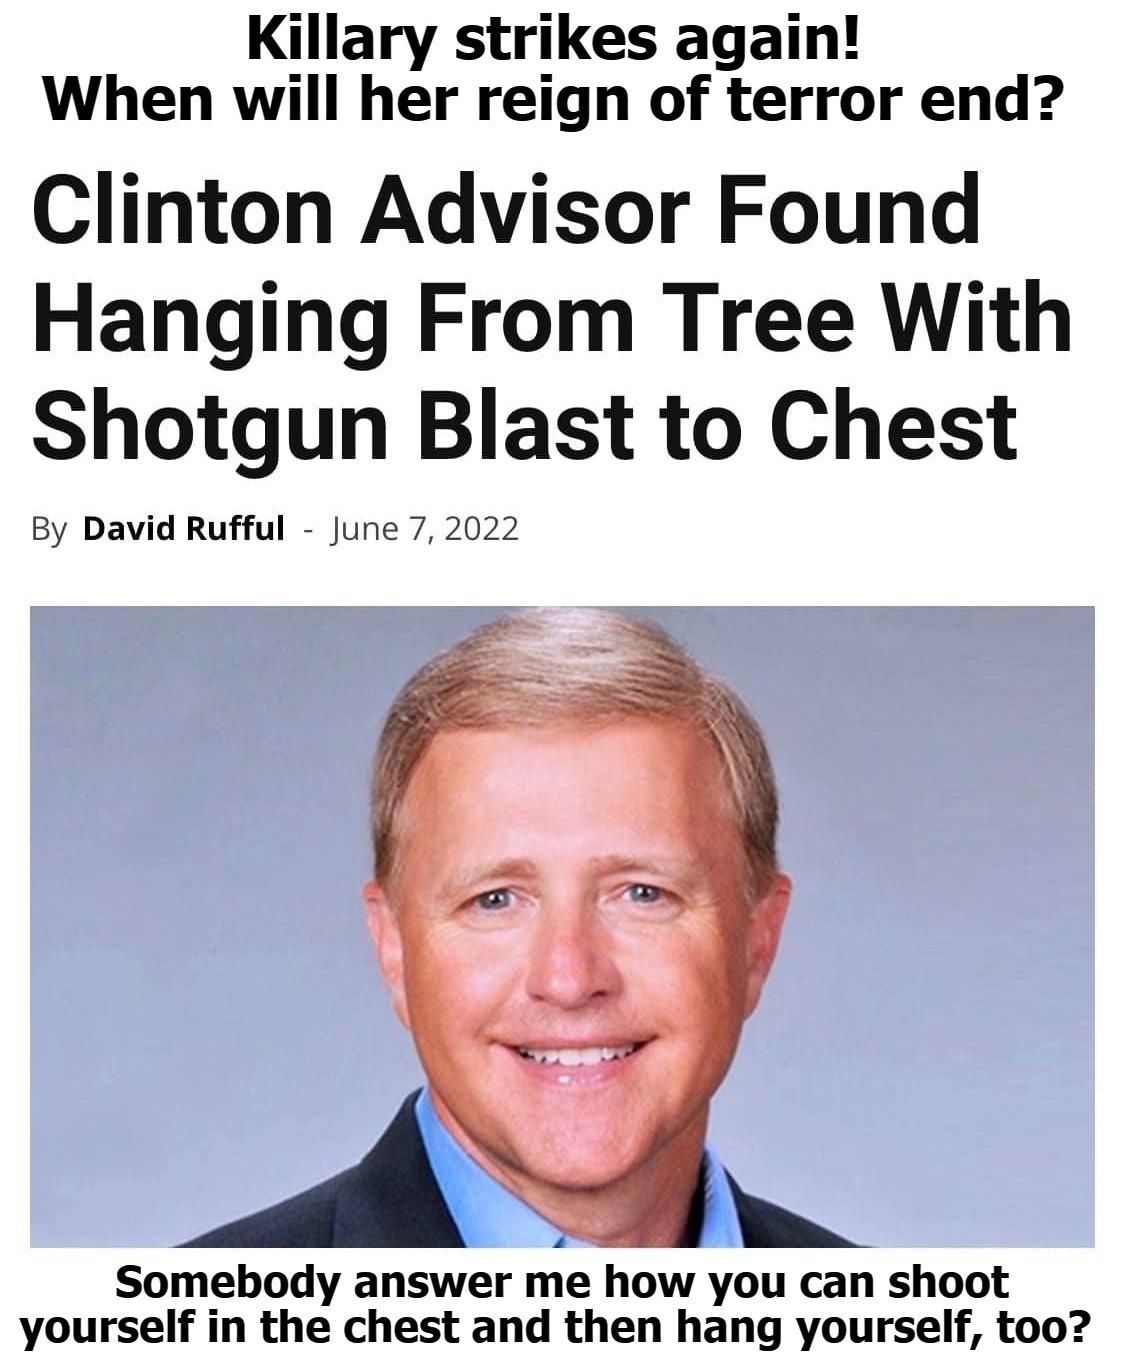 Another case of Arkancide! | image tagged in clinton deadpool,killary clinton,clinton corruption,clinton crime family,hillary clinton lying democrat liberal,arkancide | made w/ Imgflip meme maker